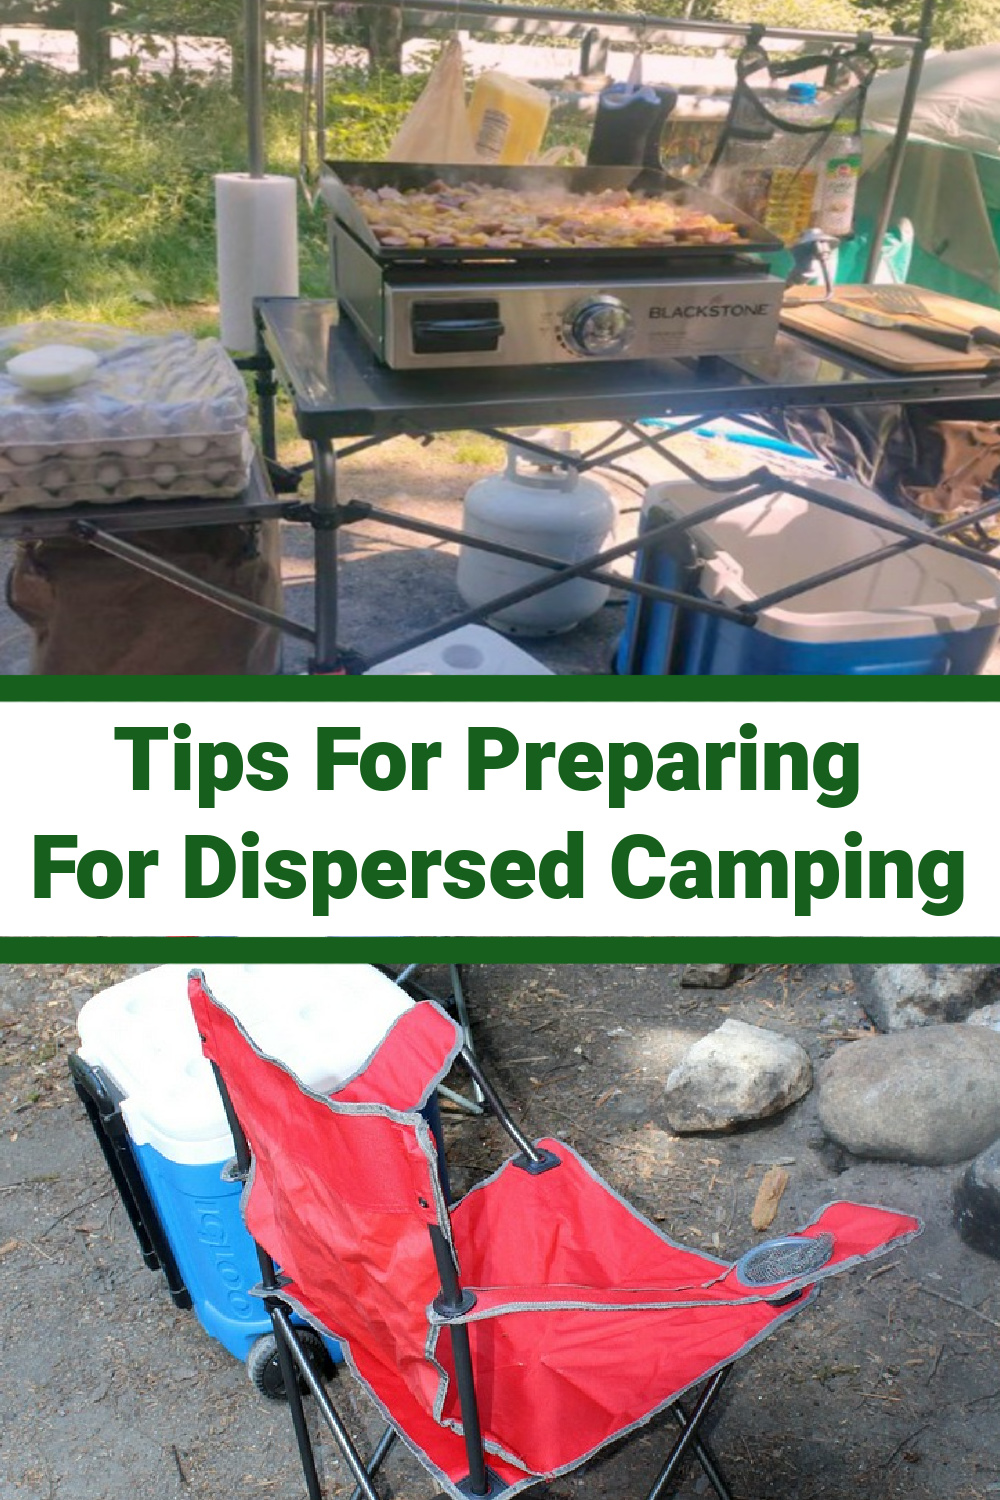 Camping stove set up and chairs around a campfire